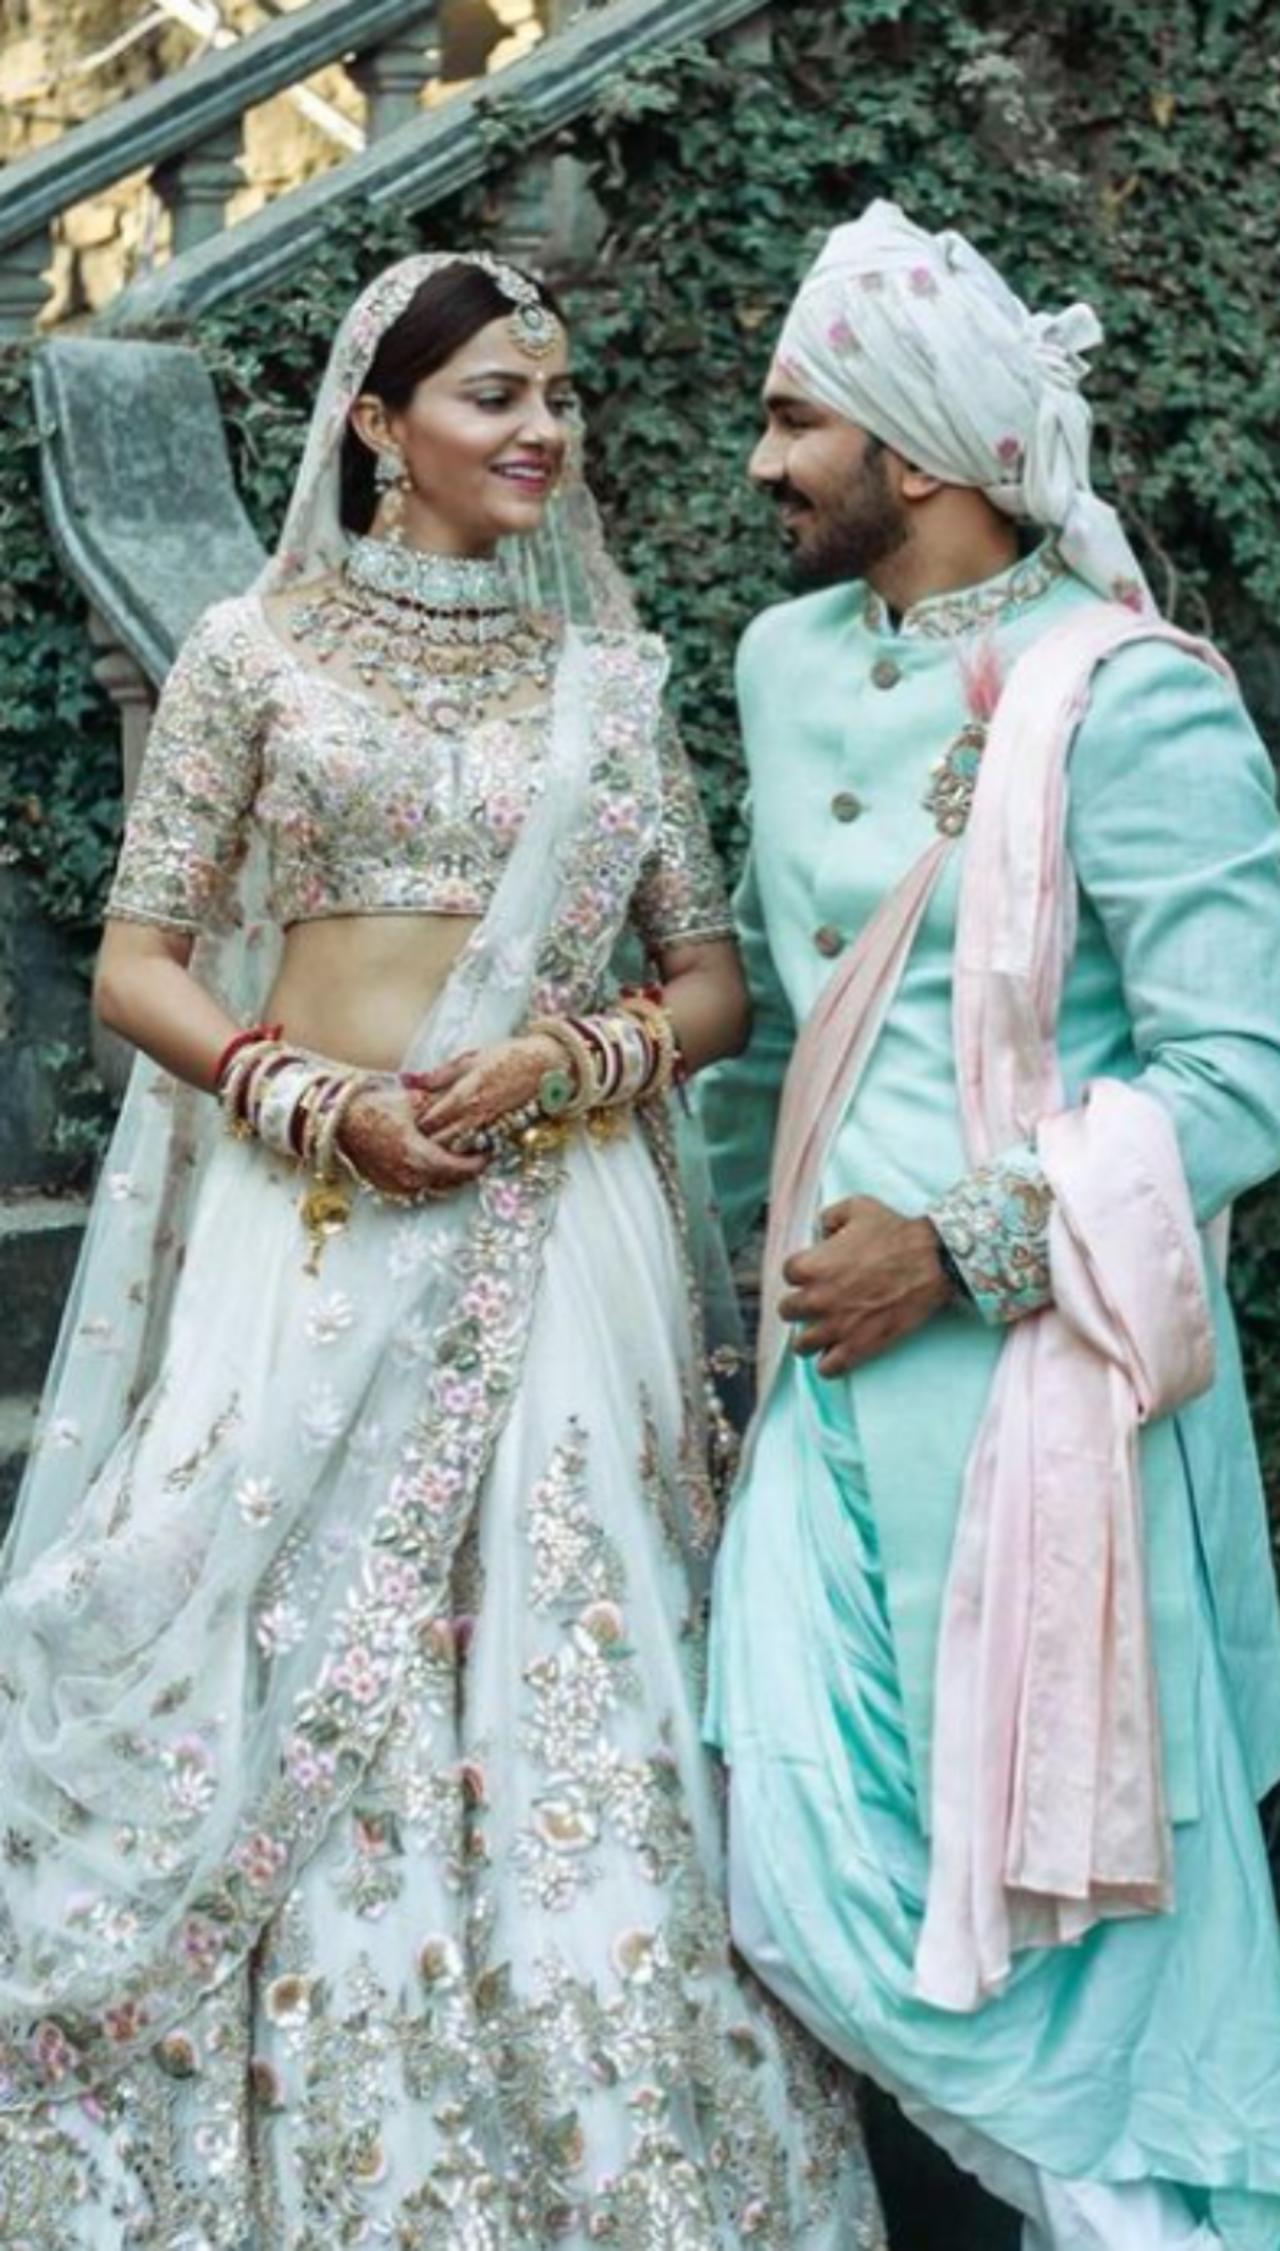 Rubina Dilaik wore a pastel coloured floral embroidered lehenga for her wedding with Abhinav Shukla in her hometown